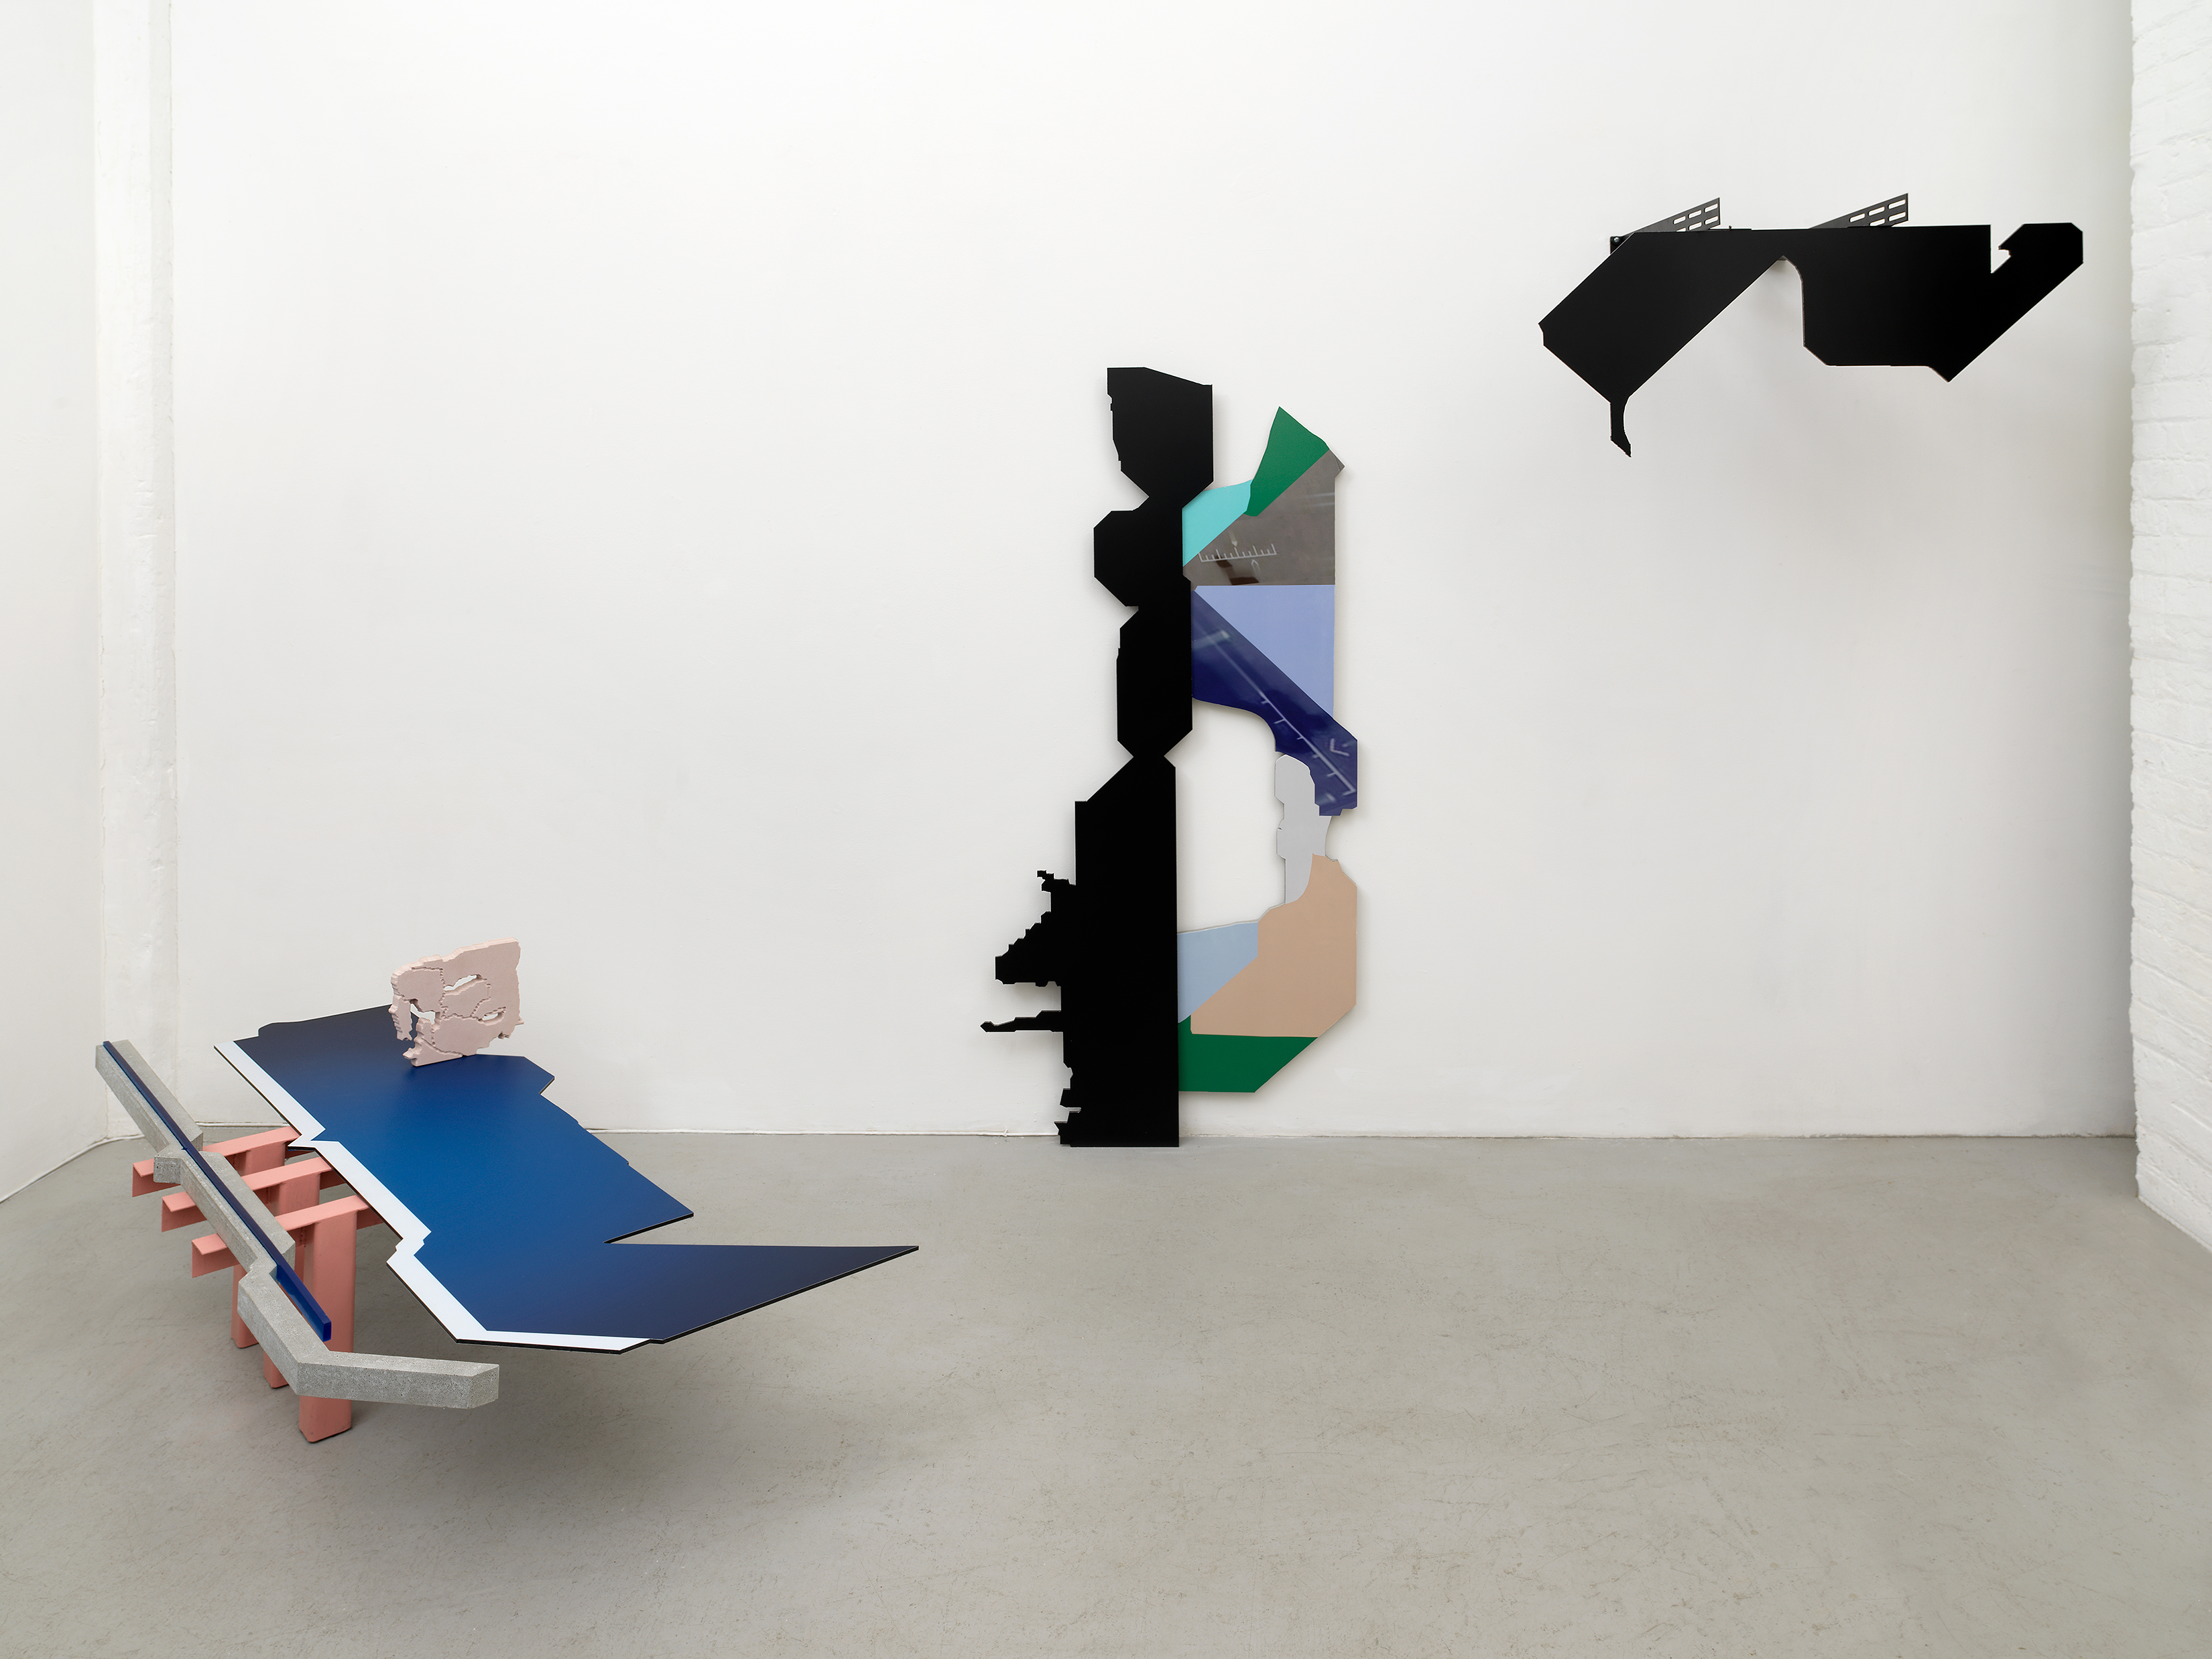 Installation view of three sculptures: from left, Activation of Marginalia, Edge Polity, Designed Subject Navigates the Blob